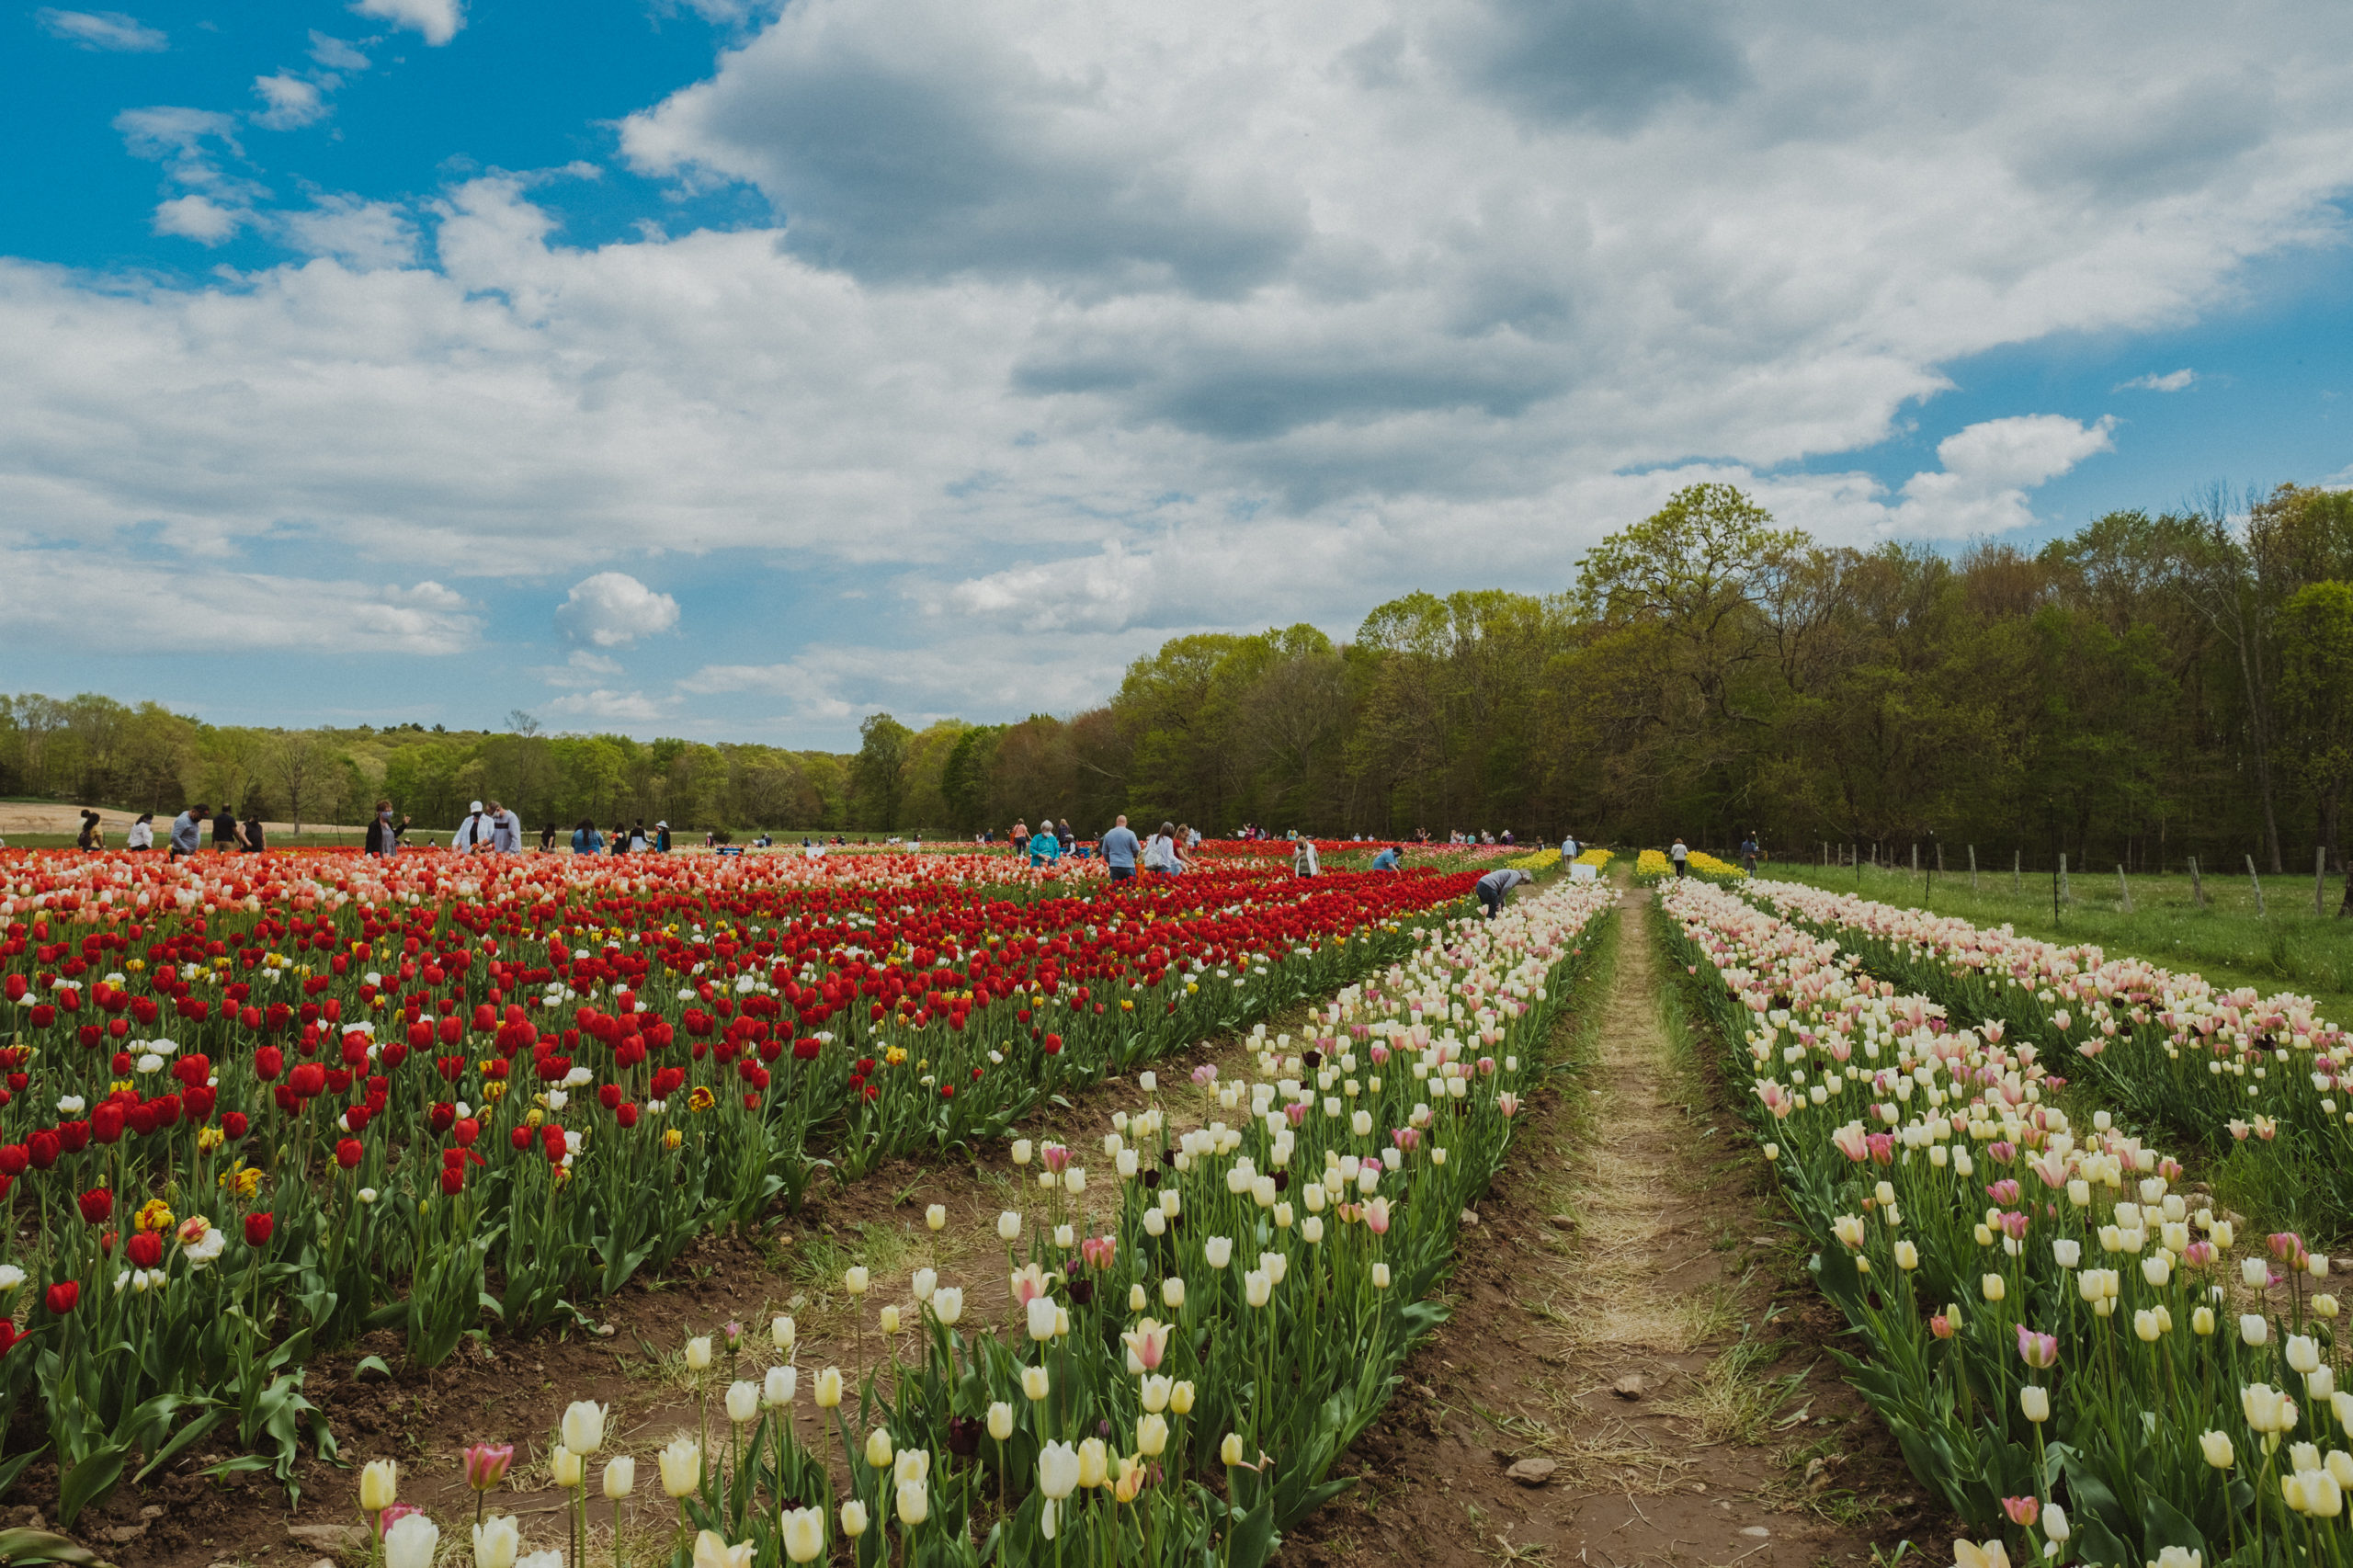 Wicked Tulips Now Has A Connecticut Flower Farm! » Live Lovely Photography